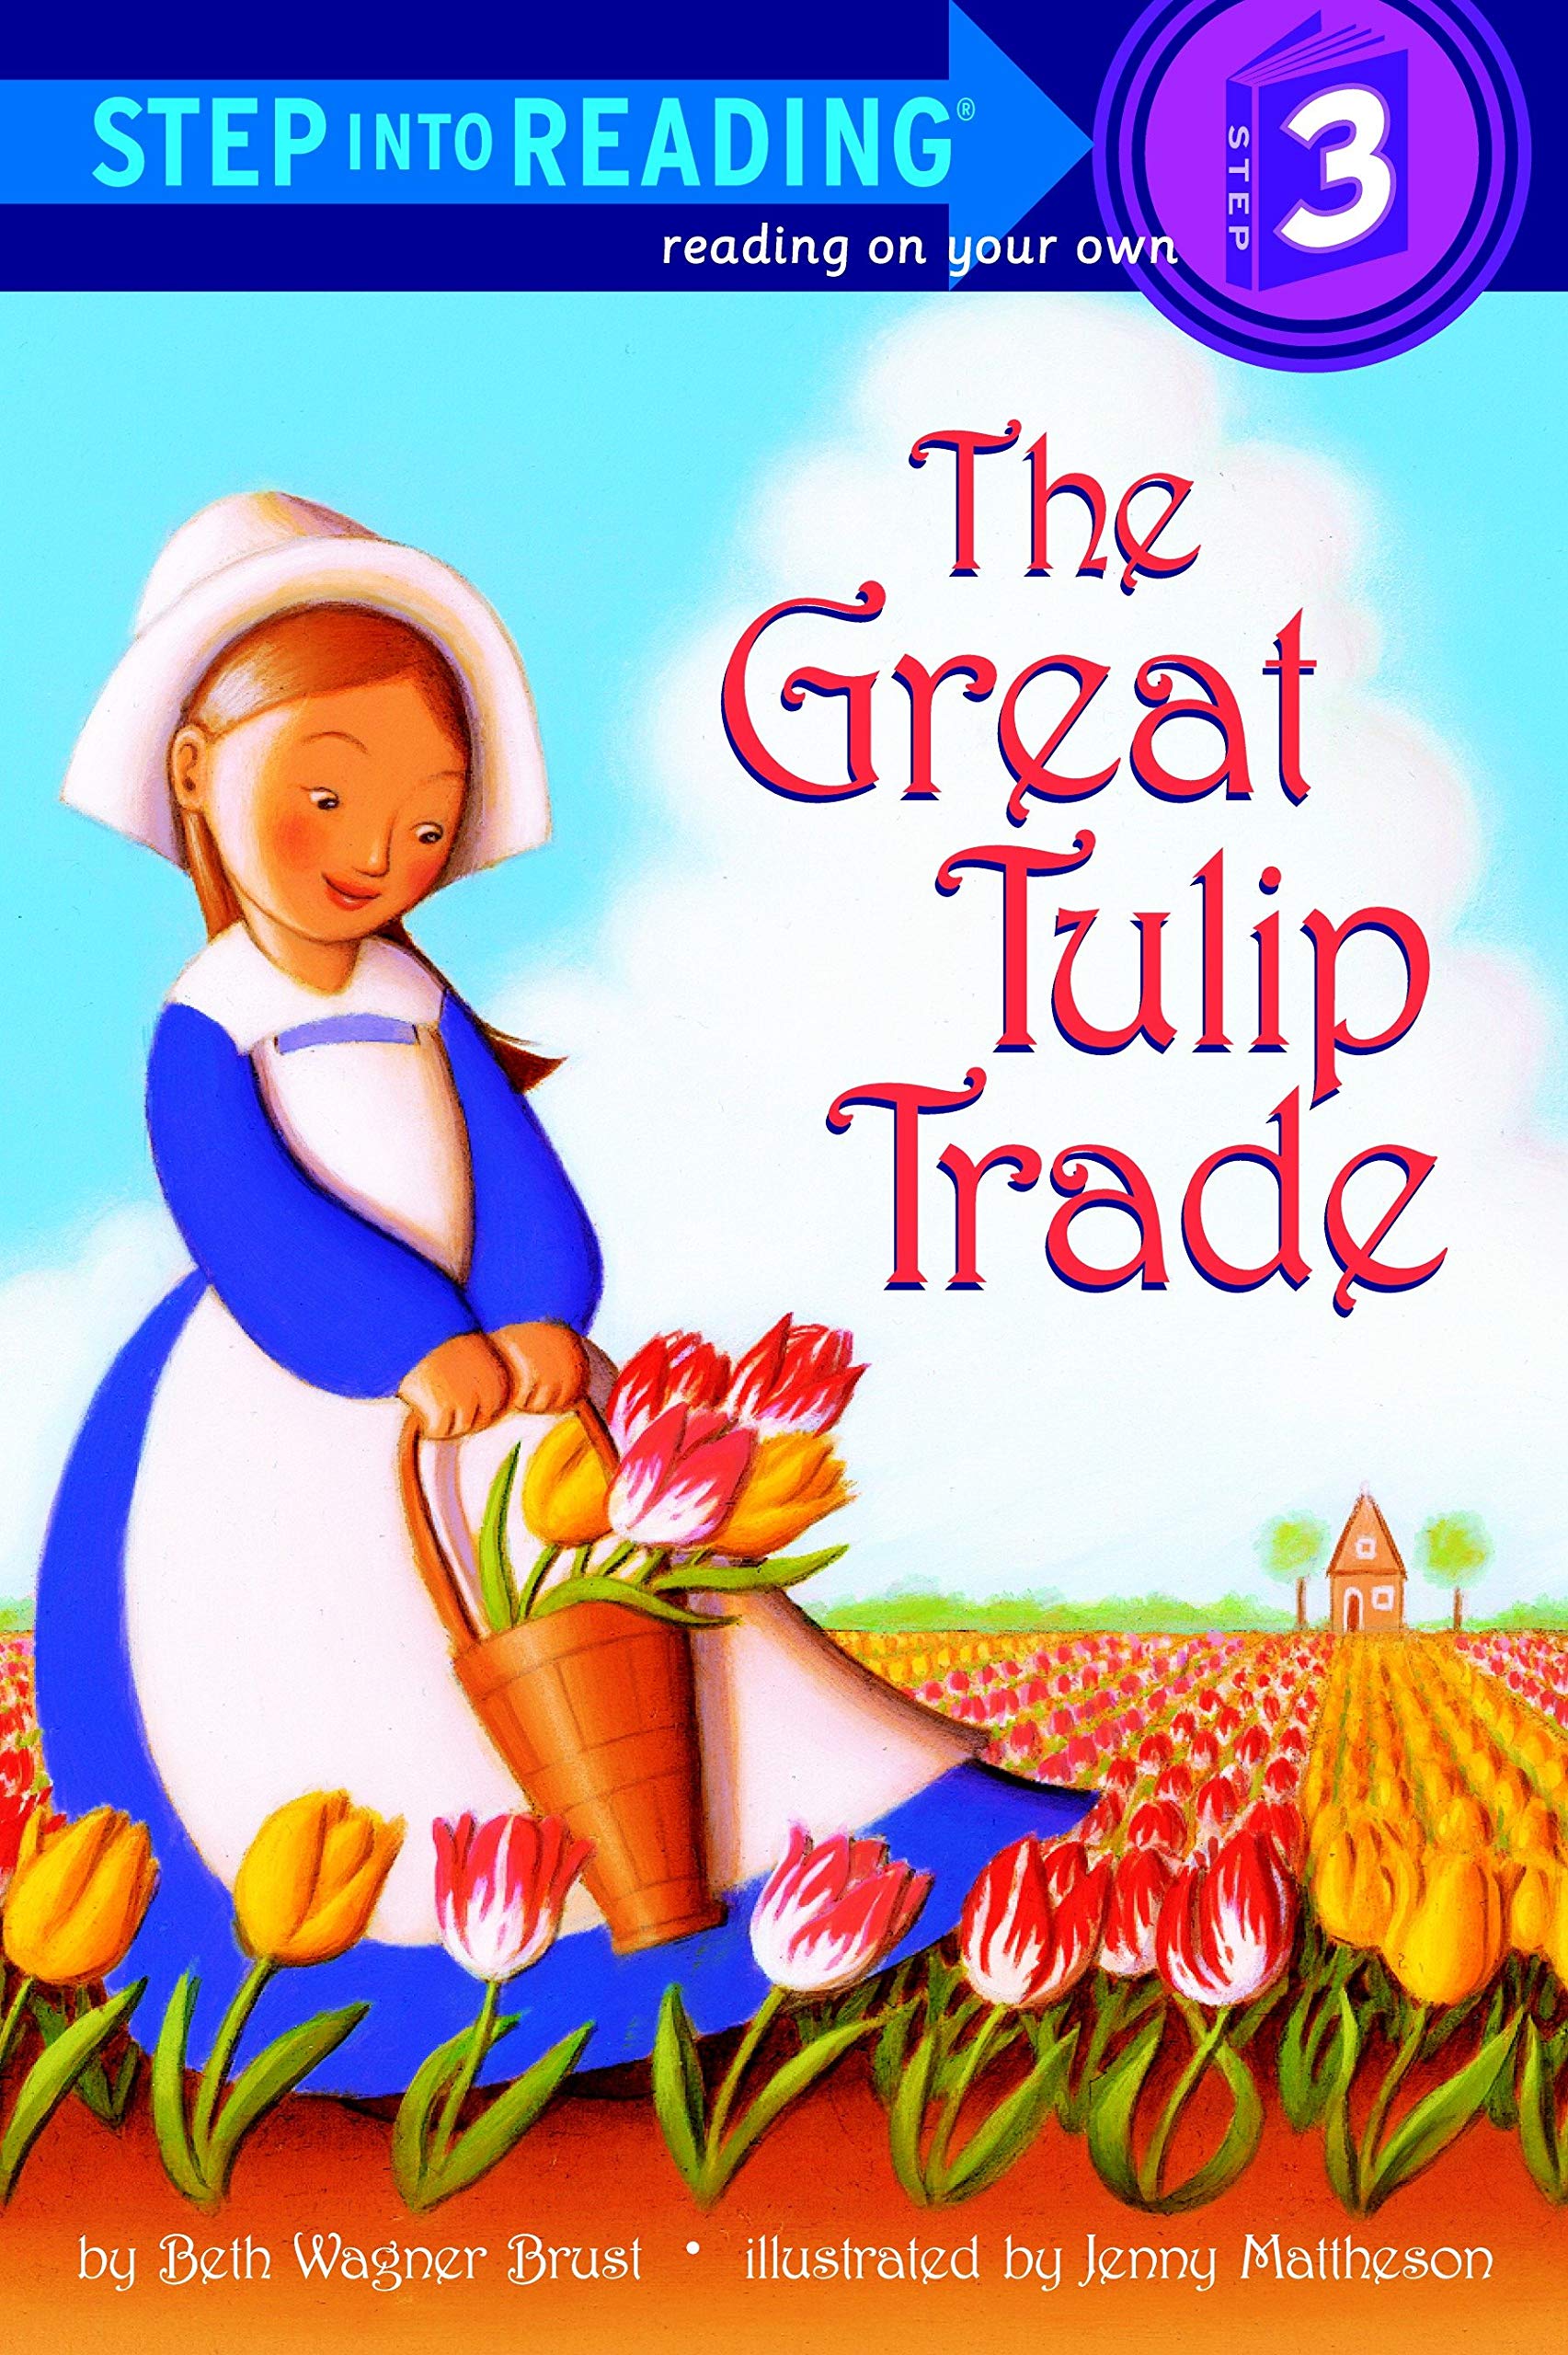 Image for "The Great Tulip Trade"